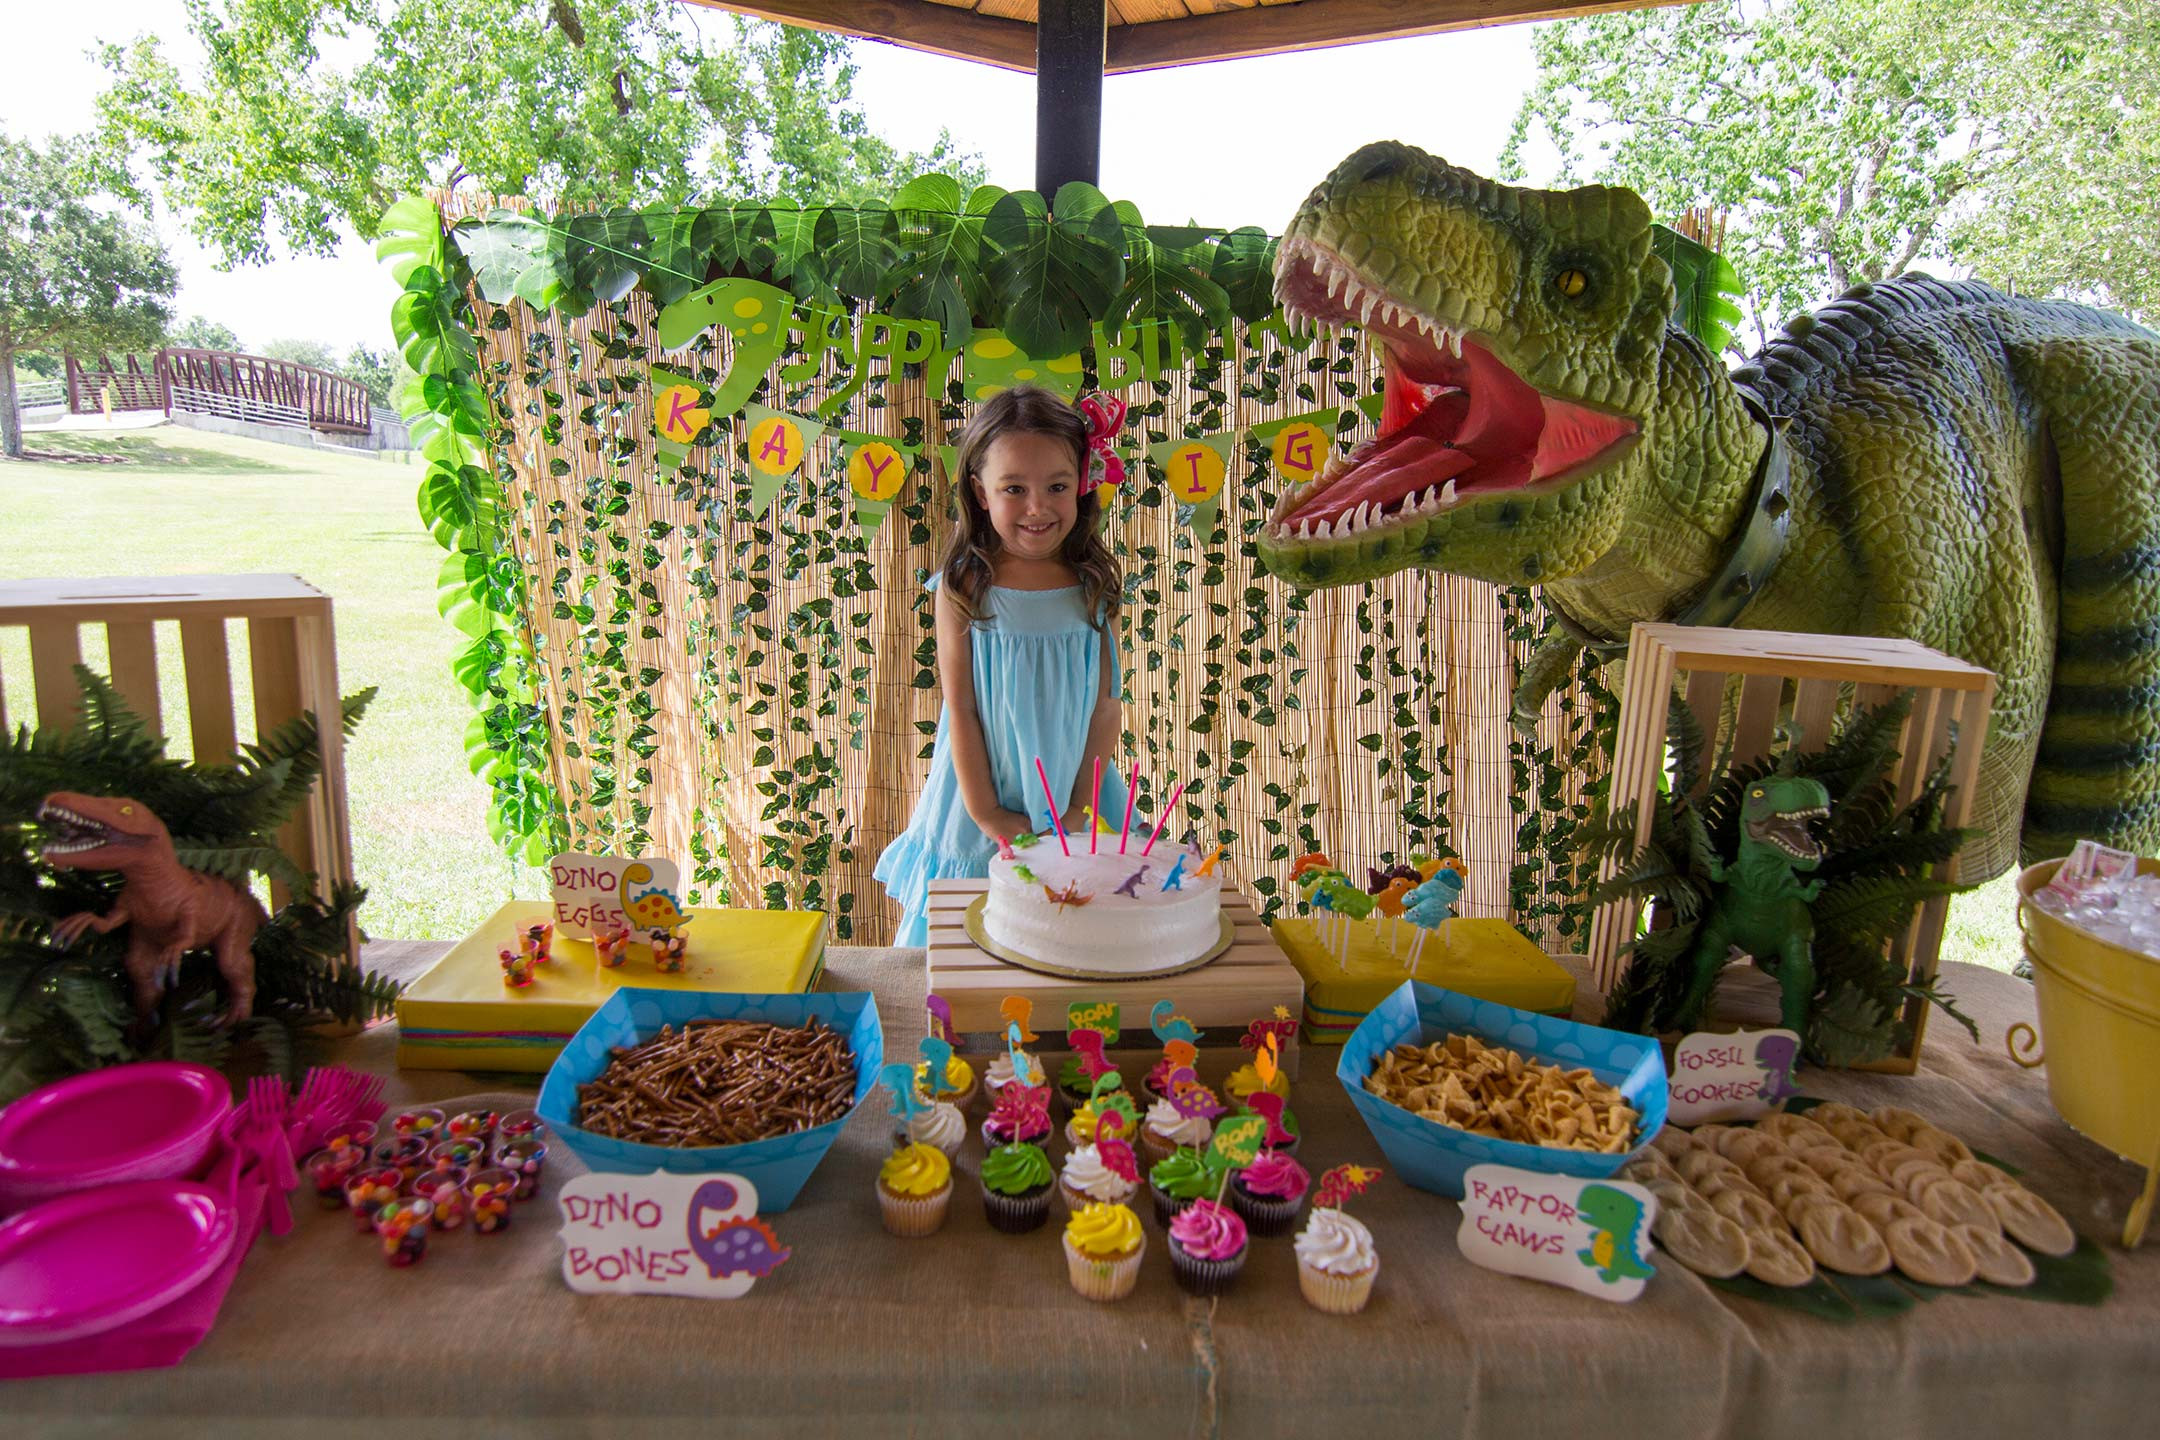 Girl Dinosaur Birthday Party
 Tag Archive for "Dinosaur Birthday Party"